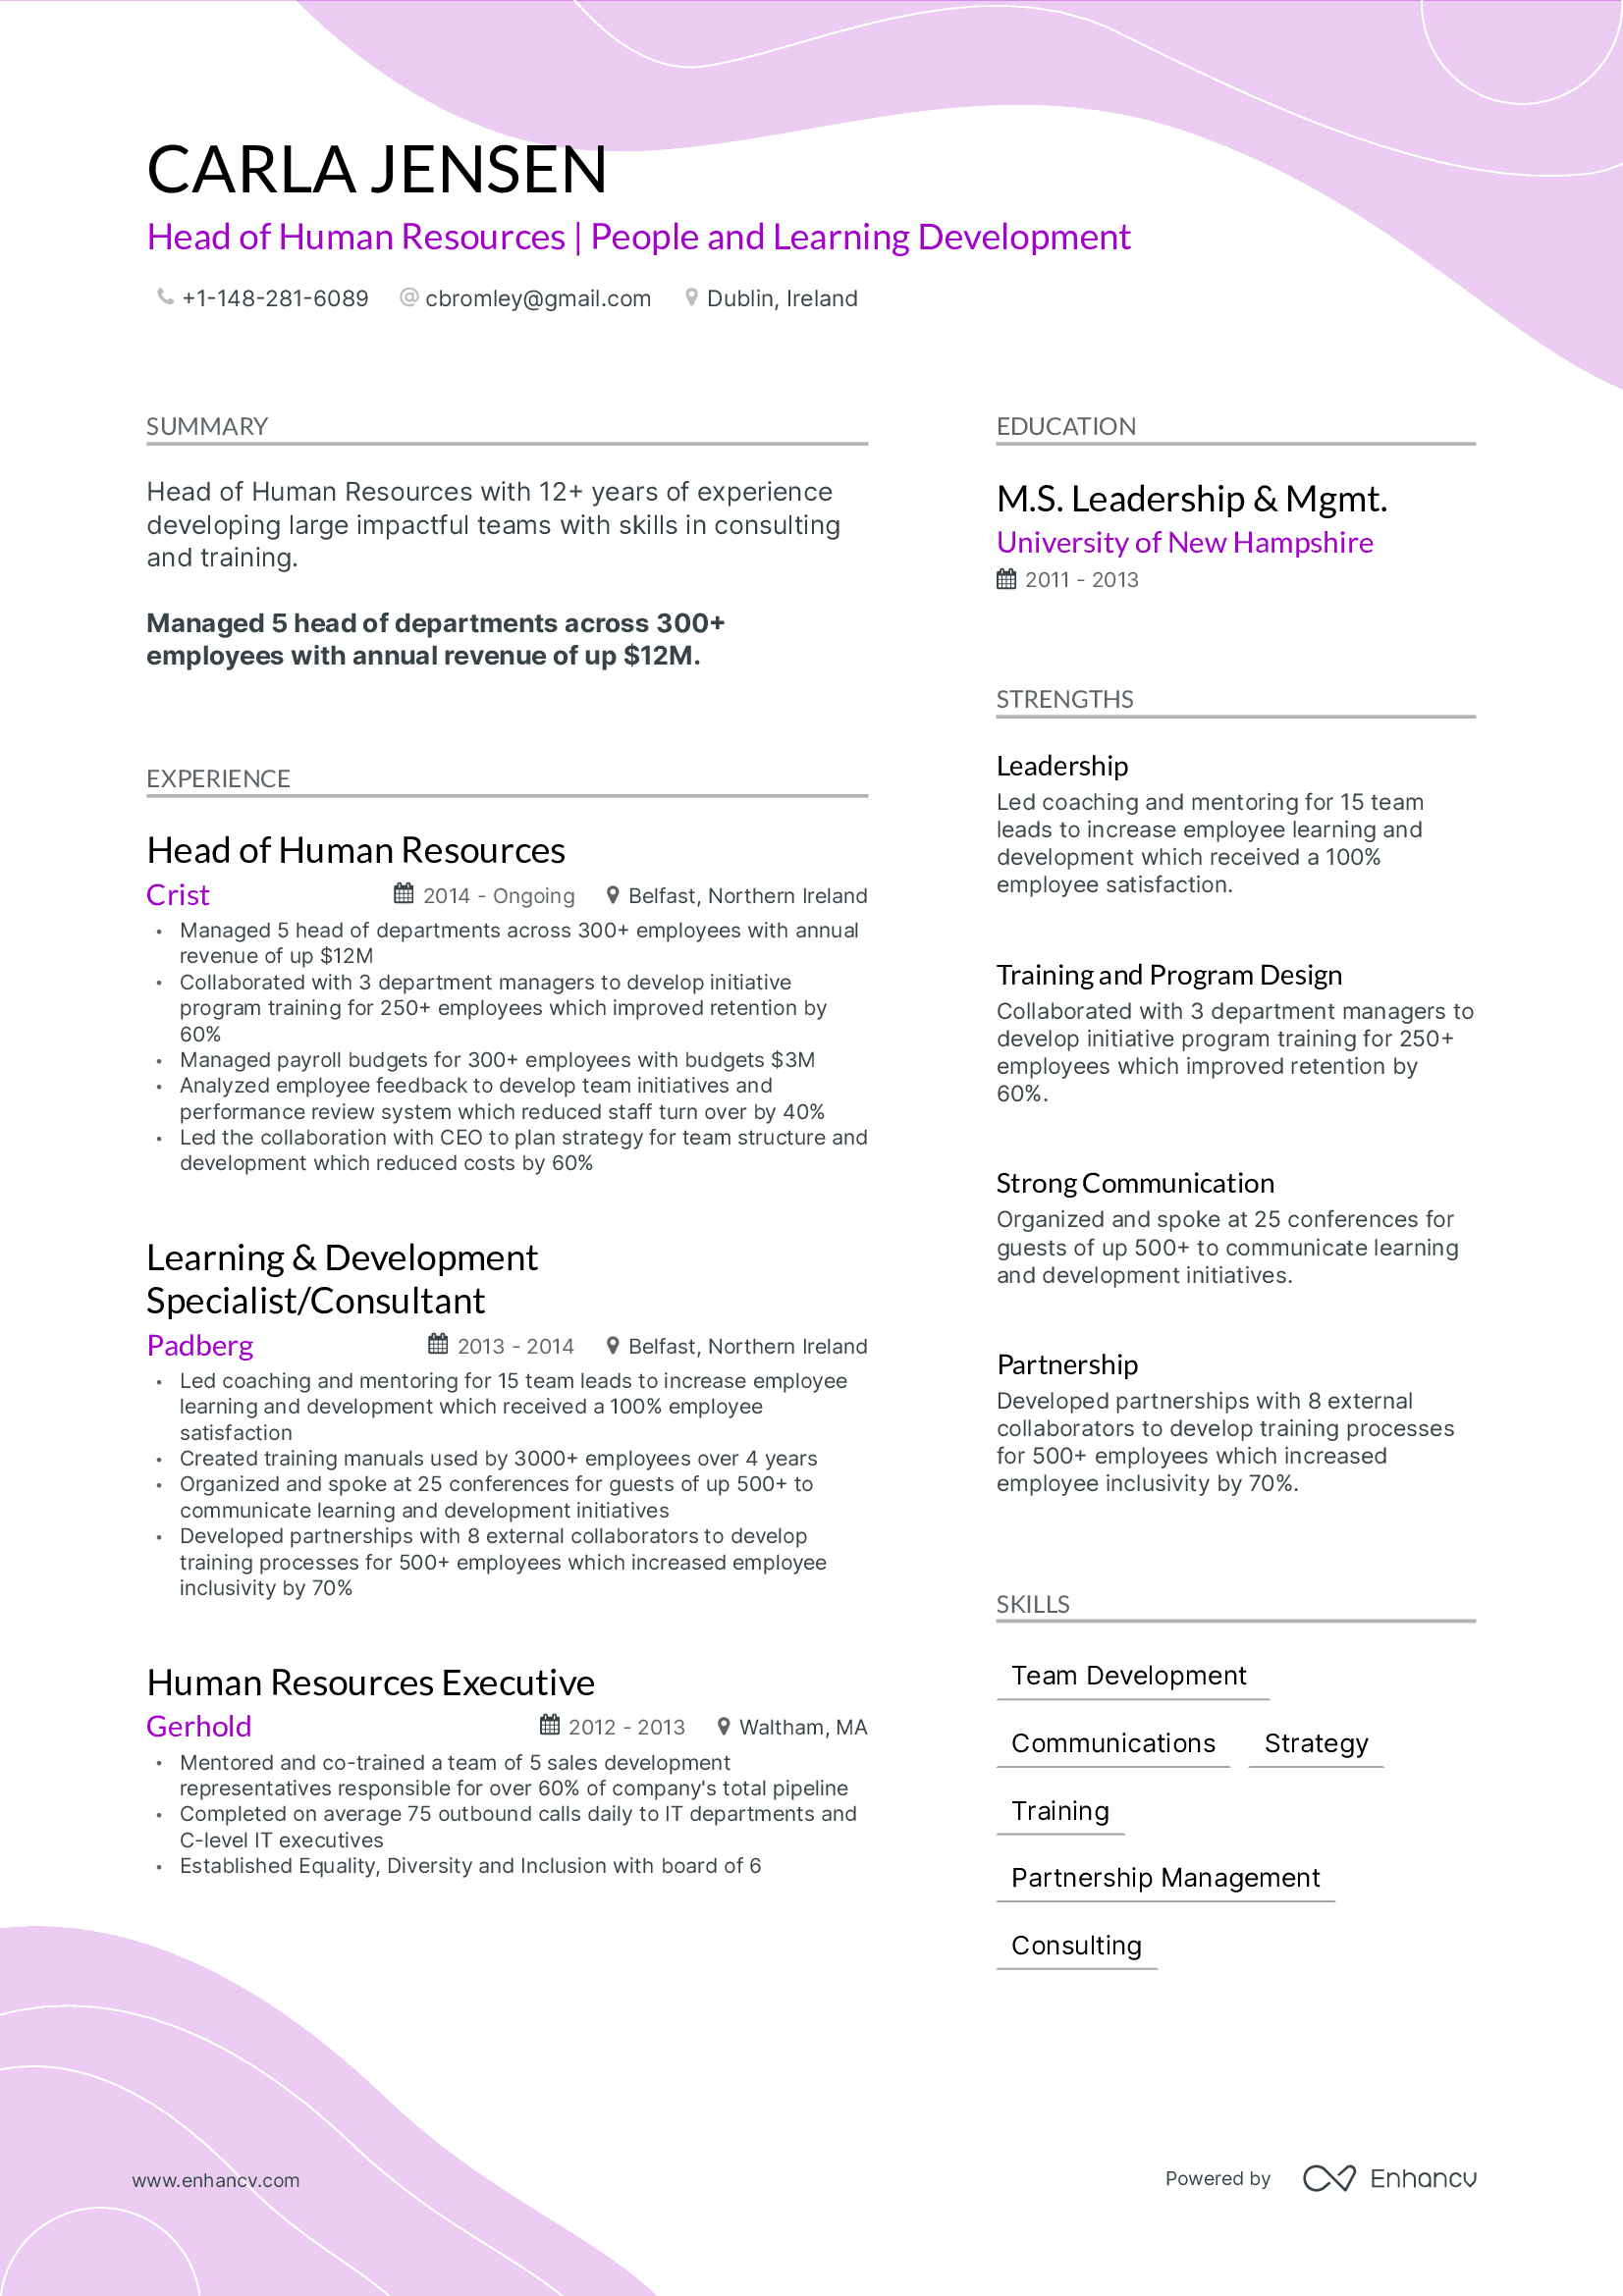 Head of Human Resources | People and Learning Development  resume example